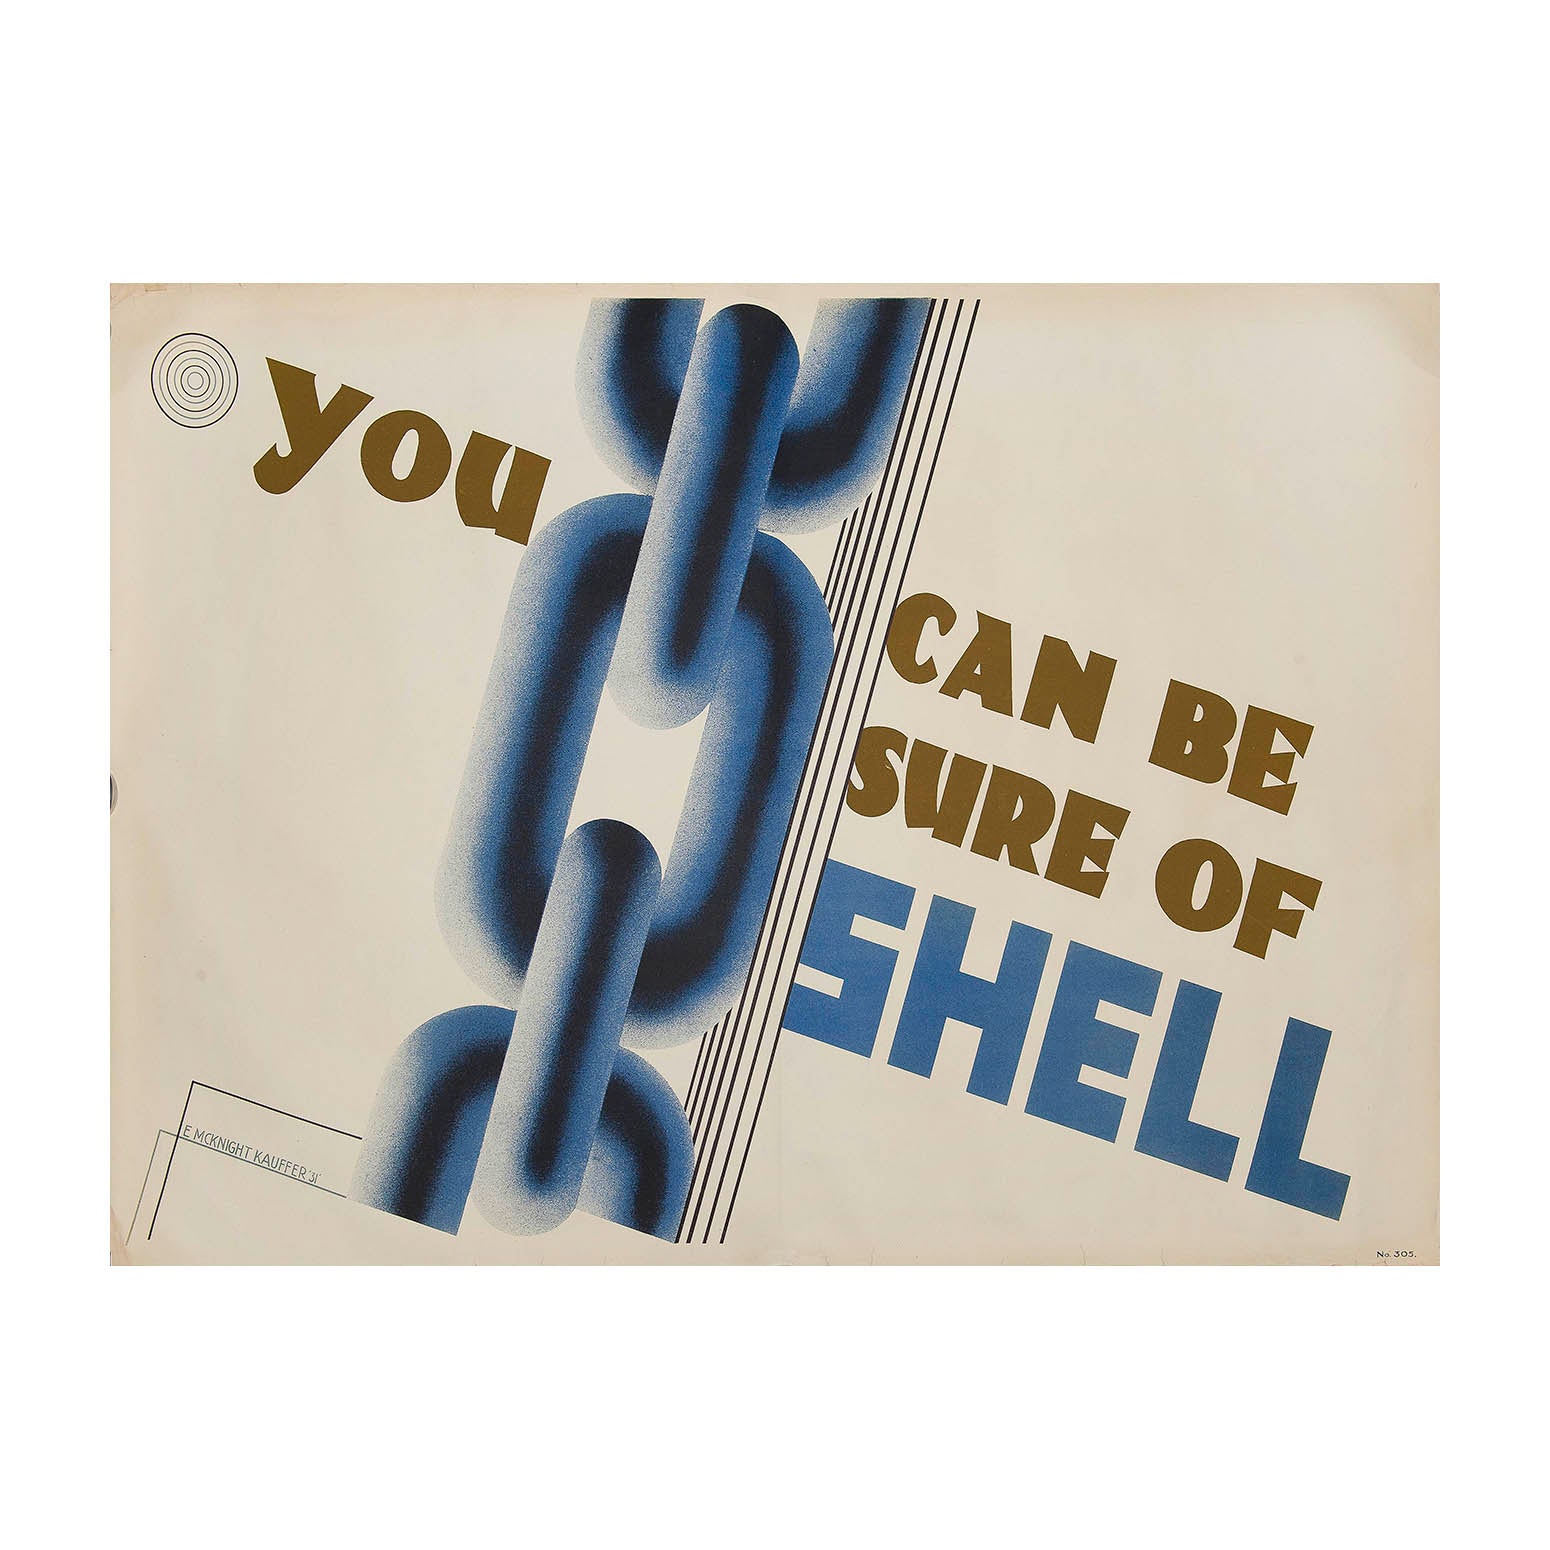 Original Shell poster: You Can Be Sure of Shell, Edward McKnight Kauffer 1931. A chain with asymmetric lettering to suggest power and modernity. 